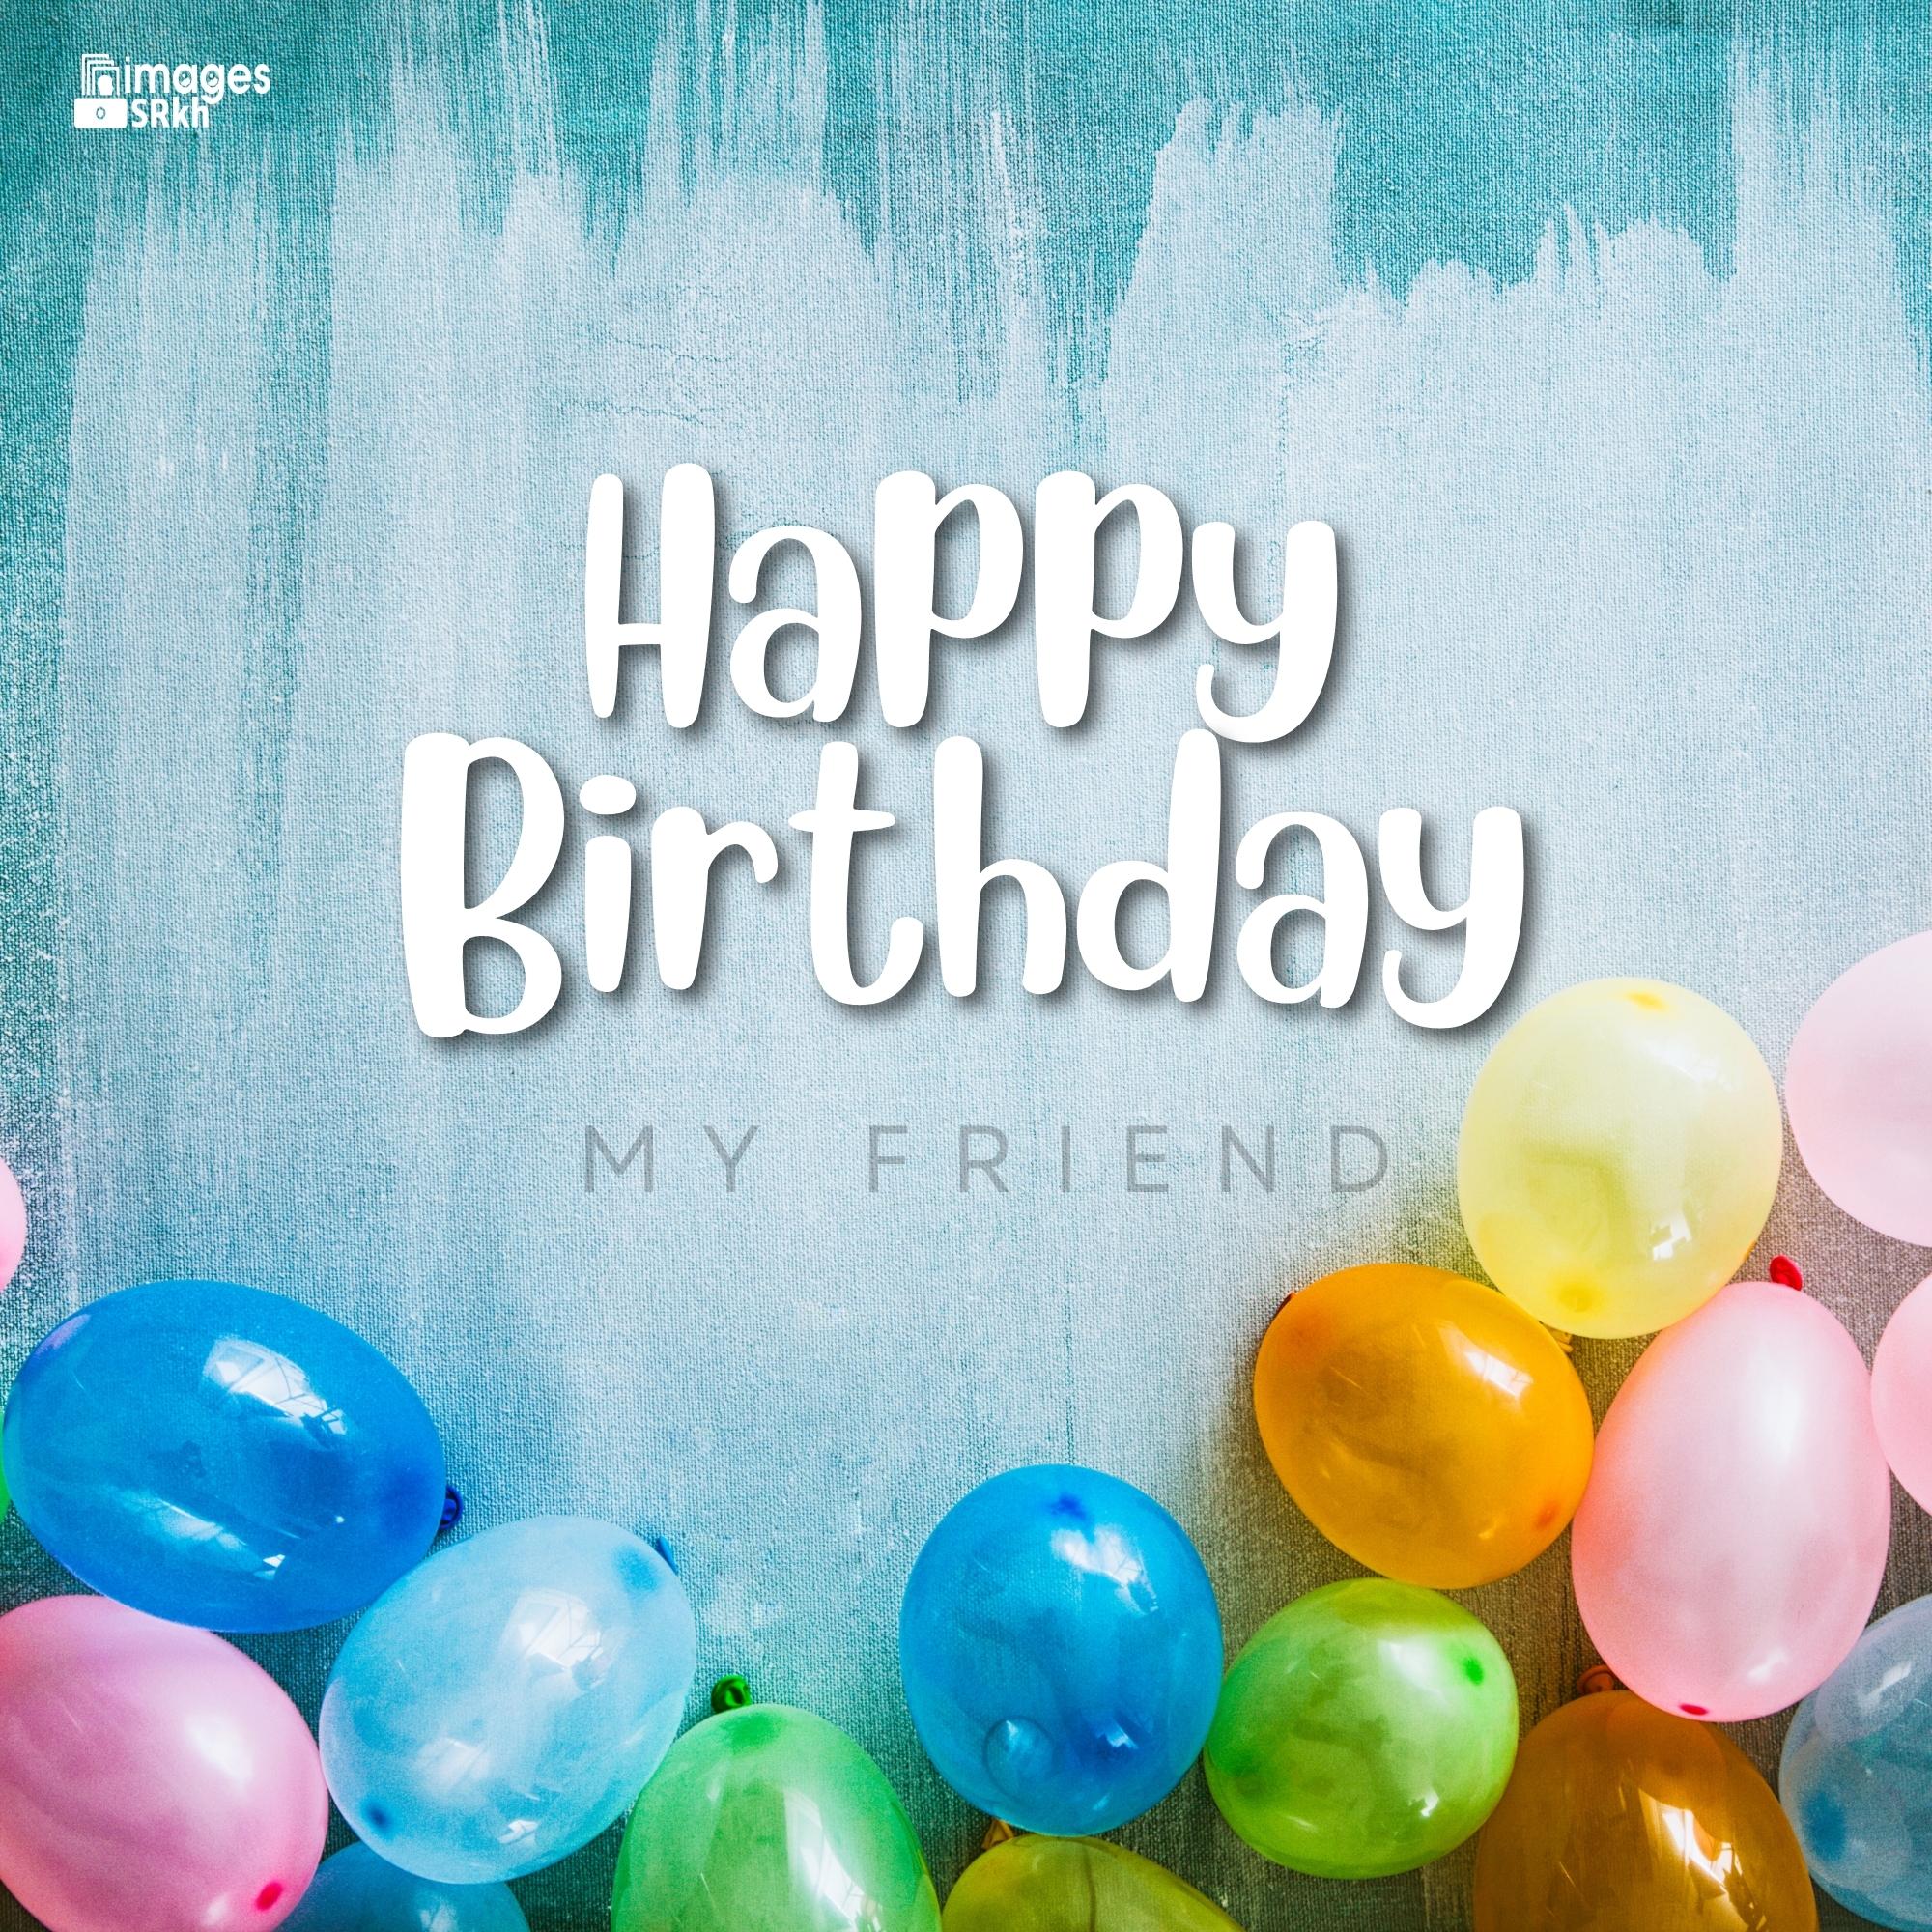 Happy Birthday Images For Friends hd